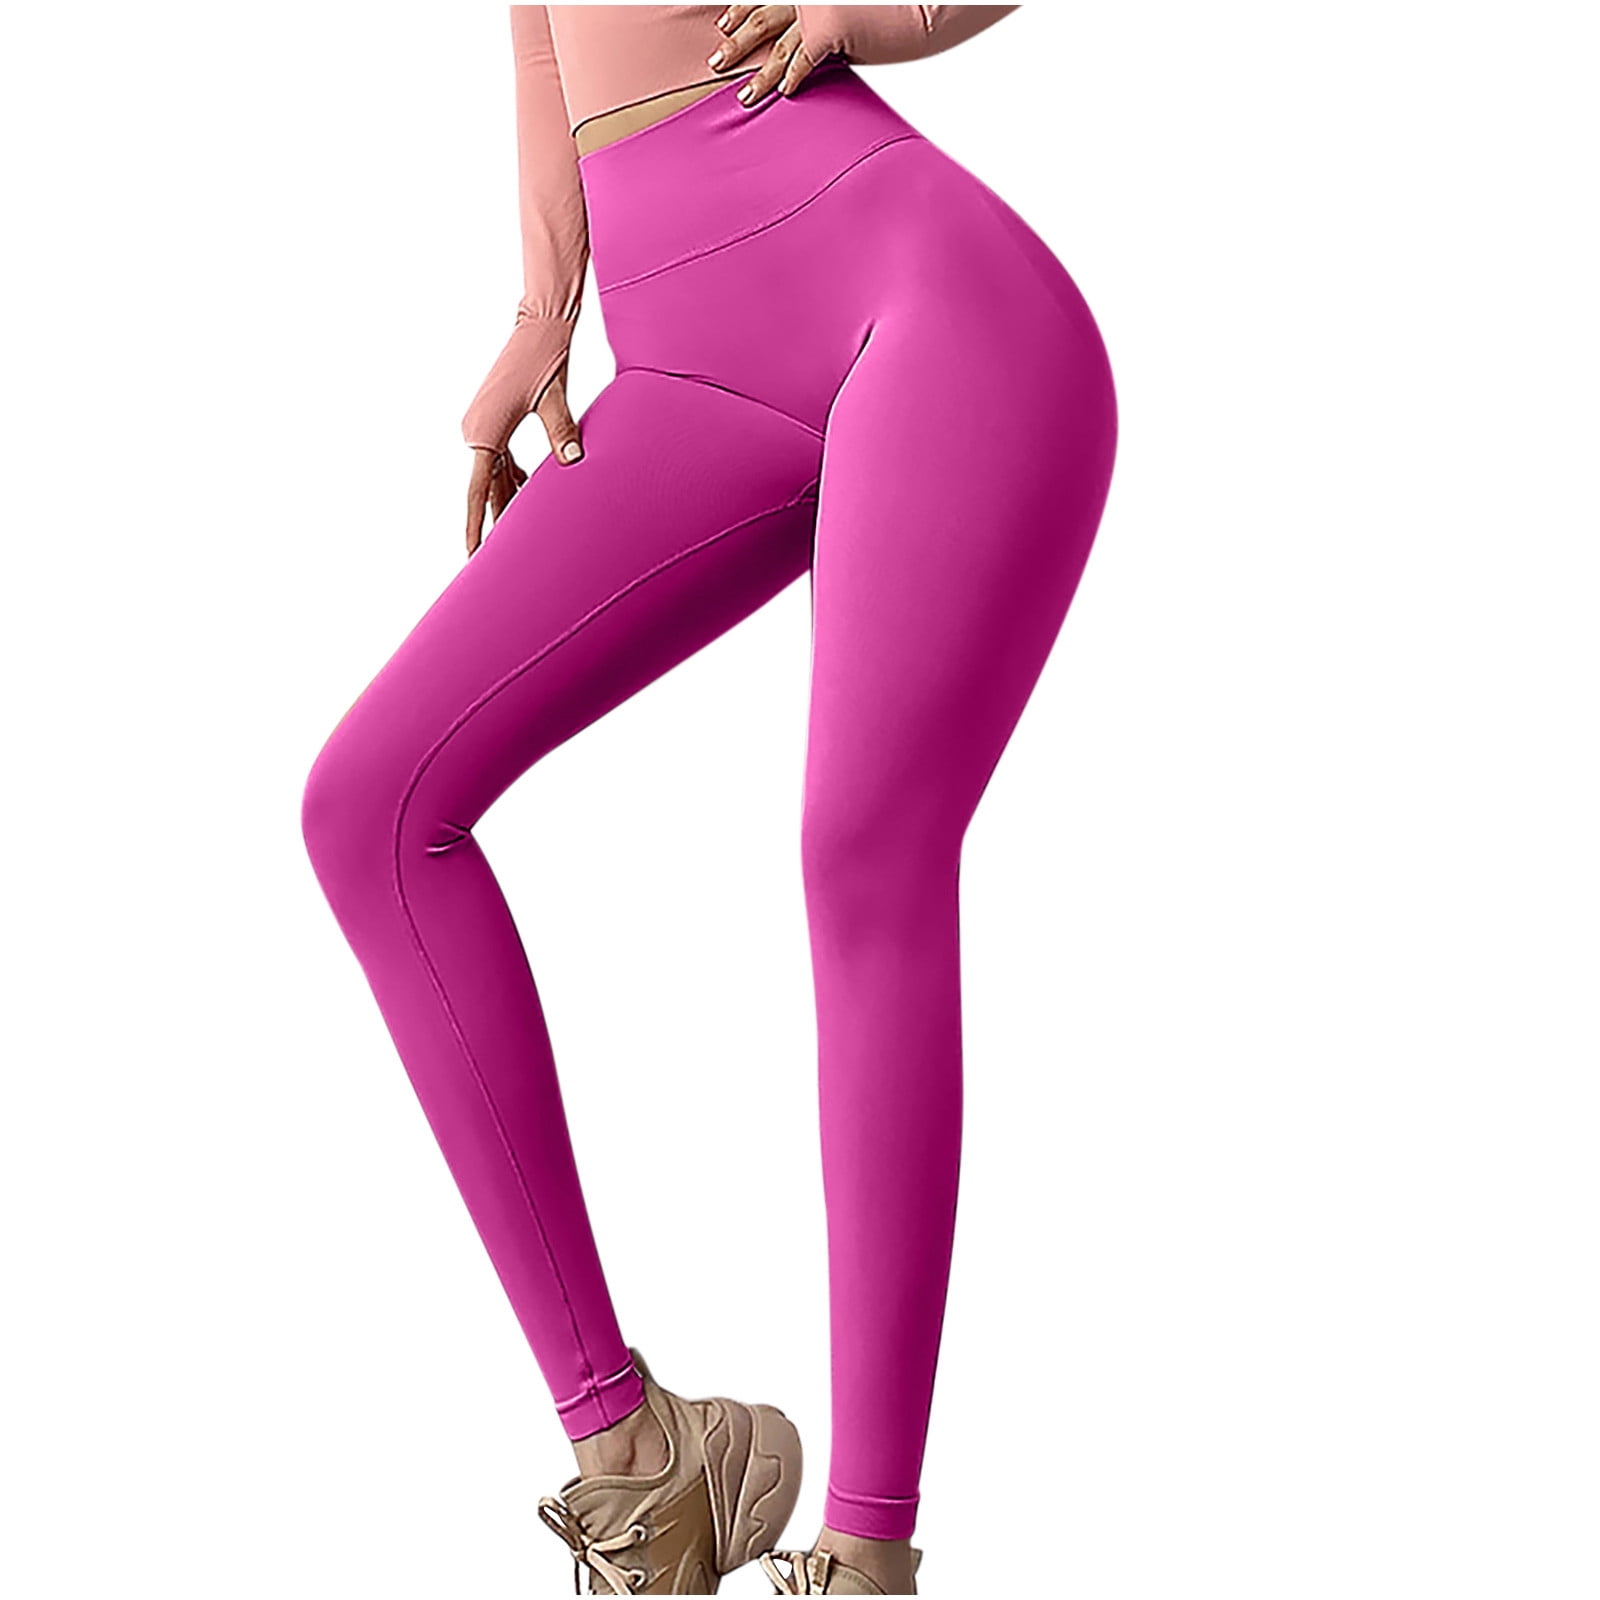 Fengqque Women's Soft Leggings to Keep Warm Women's Casual Solid